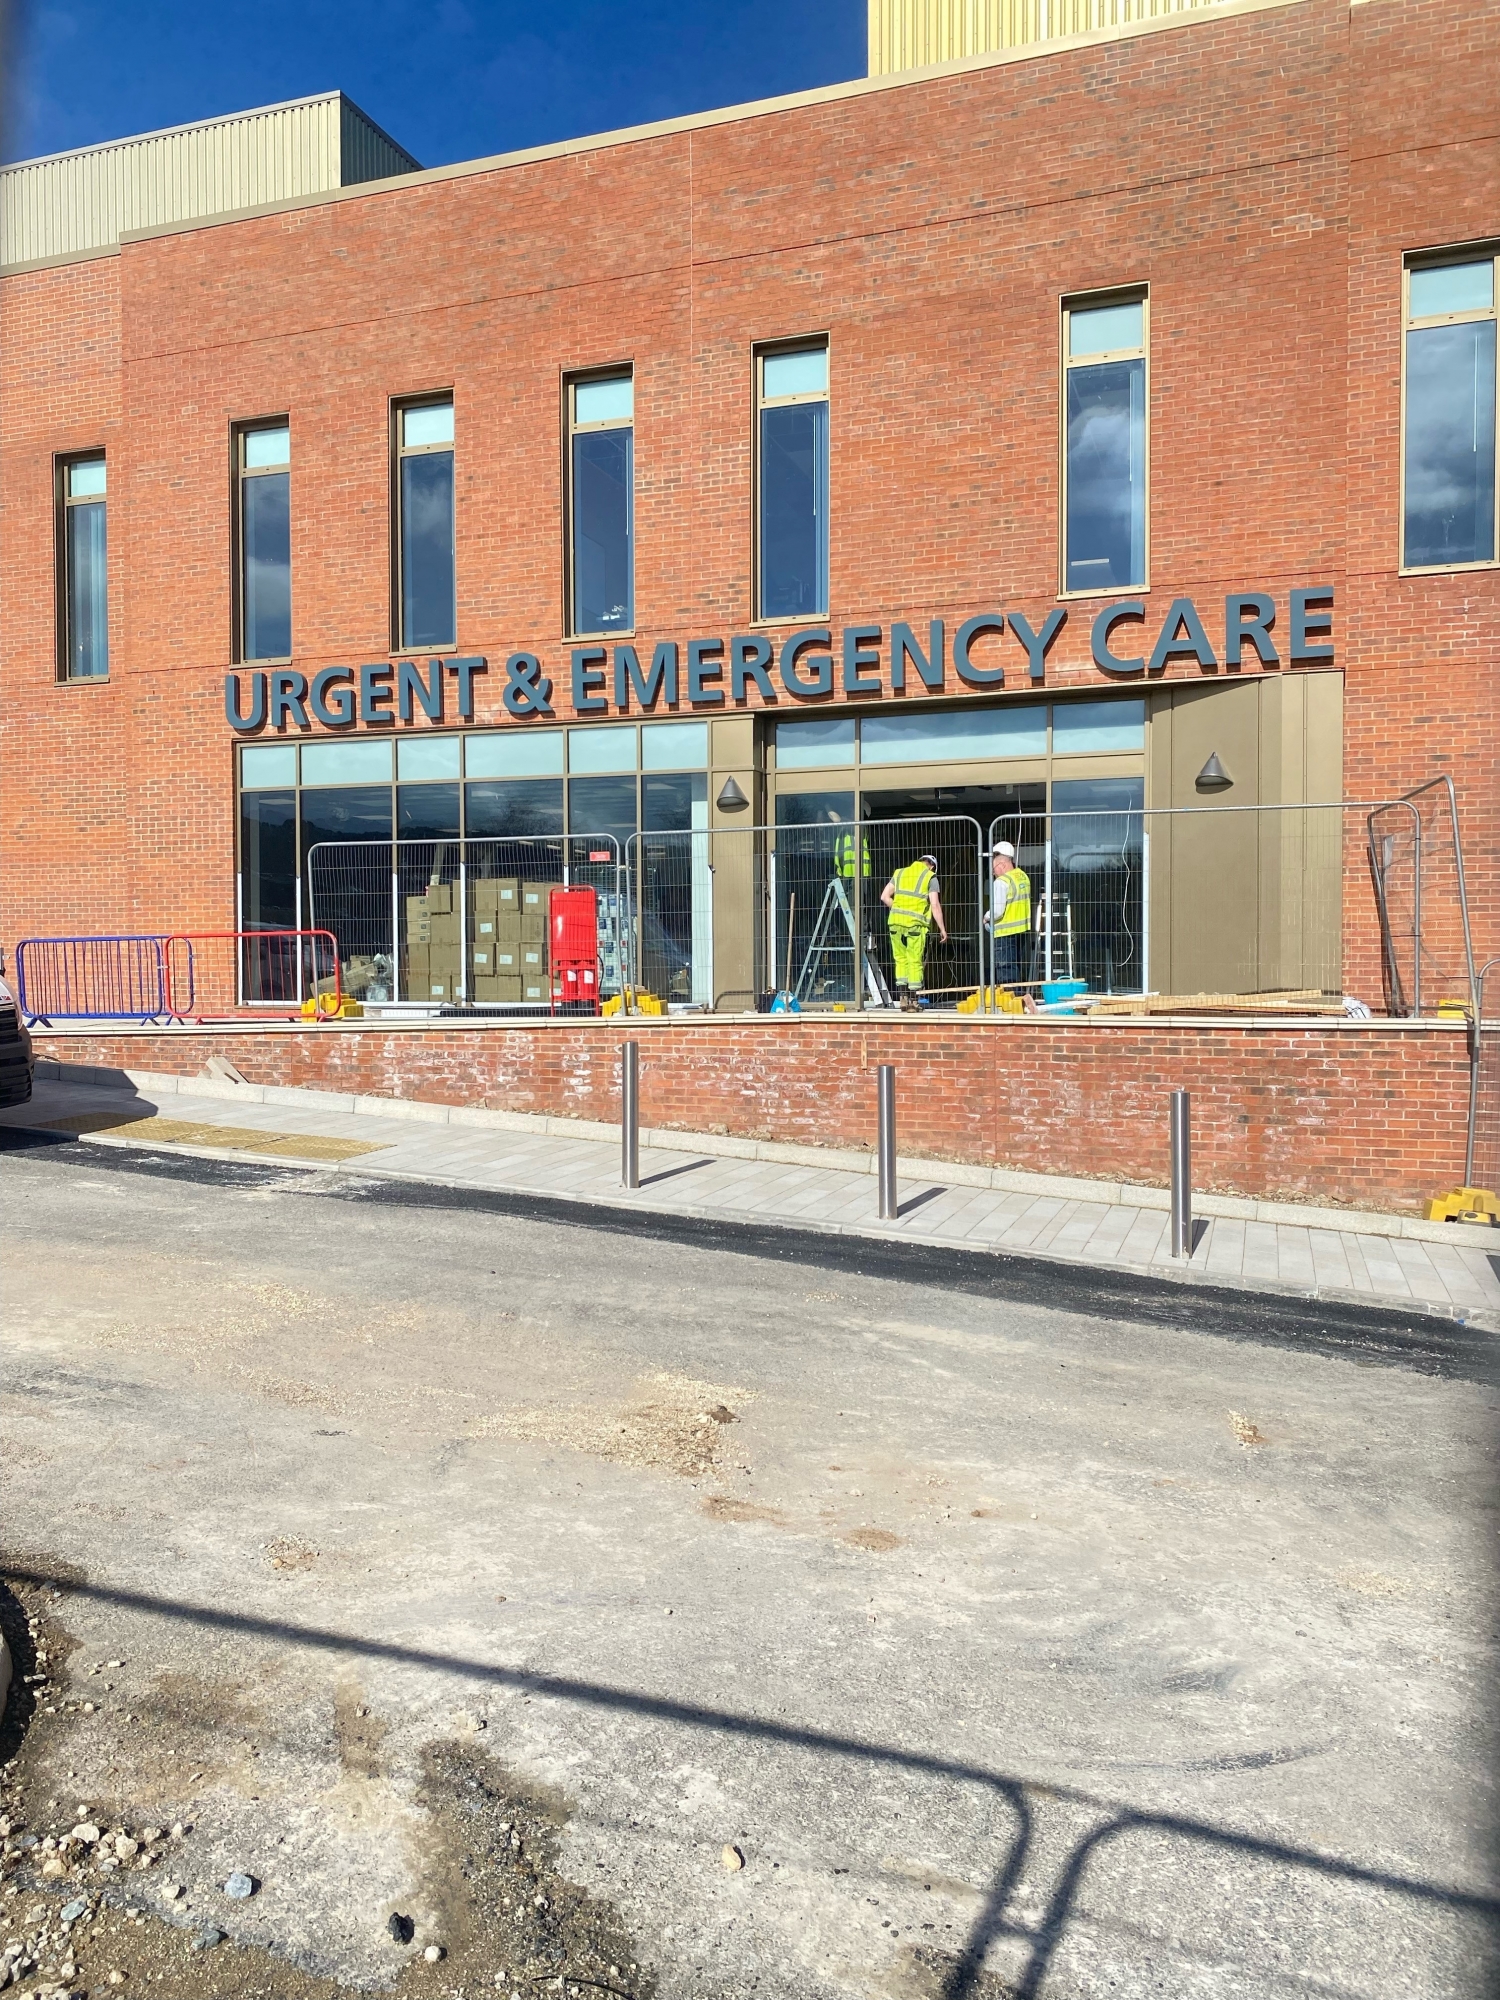 Almost finished urgent and emergency care building. Builders can be seen in the entrance.